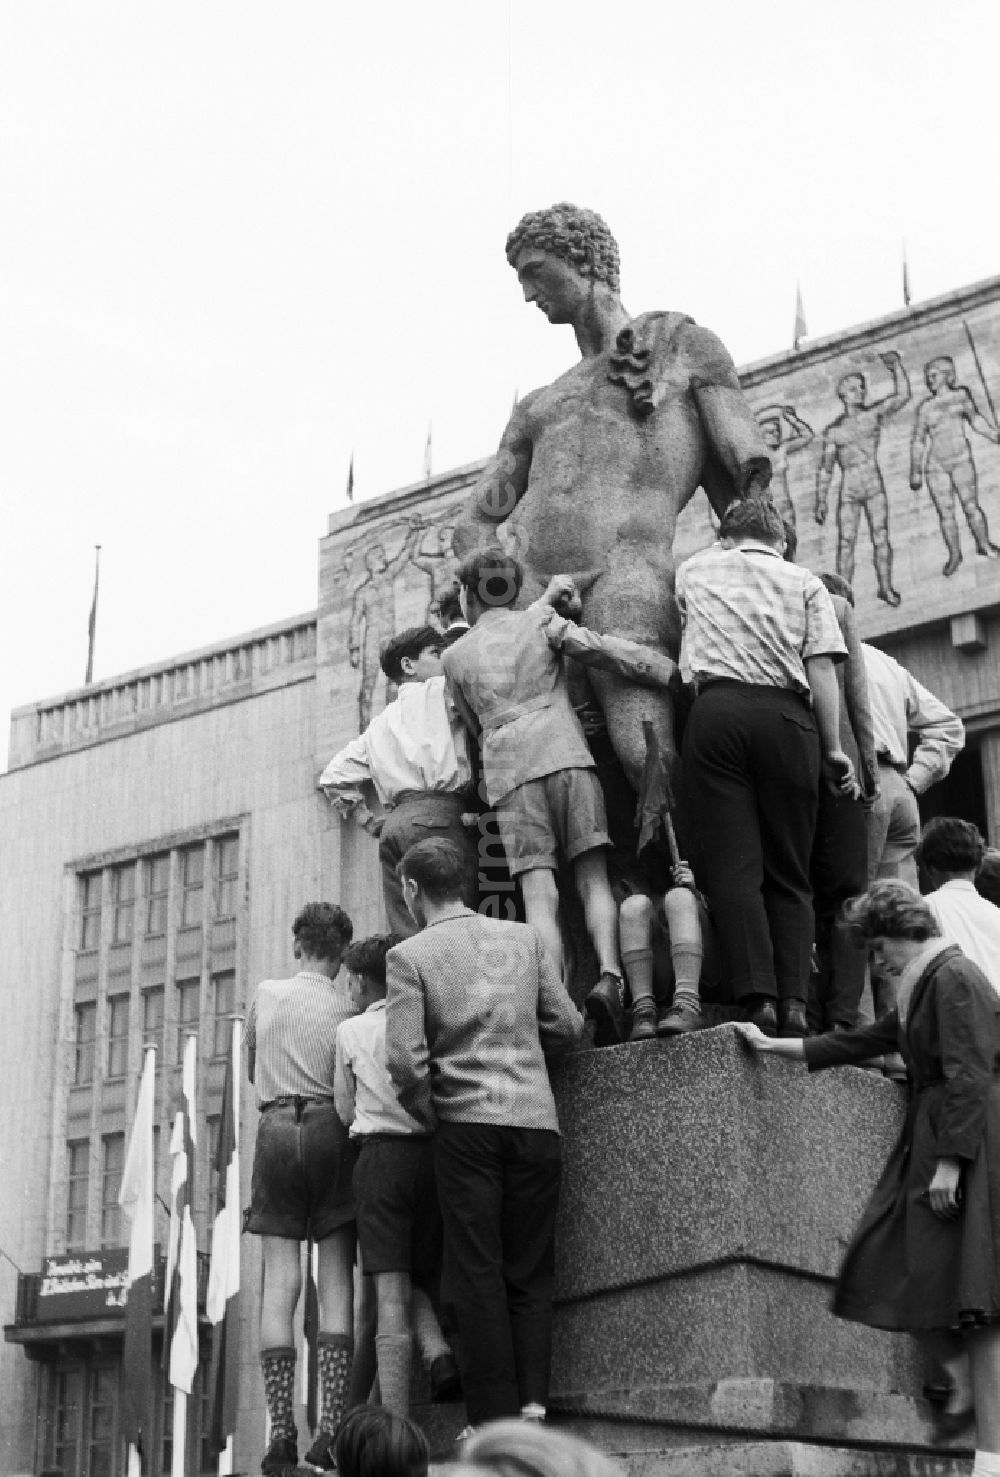 GDR picture archive: Berlin - A group of children and Judendlichen stand on the base of the sculpture and copy of a late-classicistic male figure before the entrance of the gymnasium in the Stalin's avenue in Berlin, the former capital of the GDR, German democratic republic